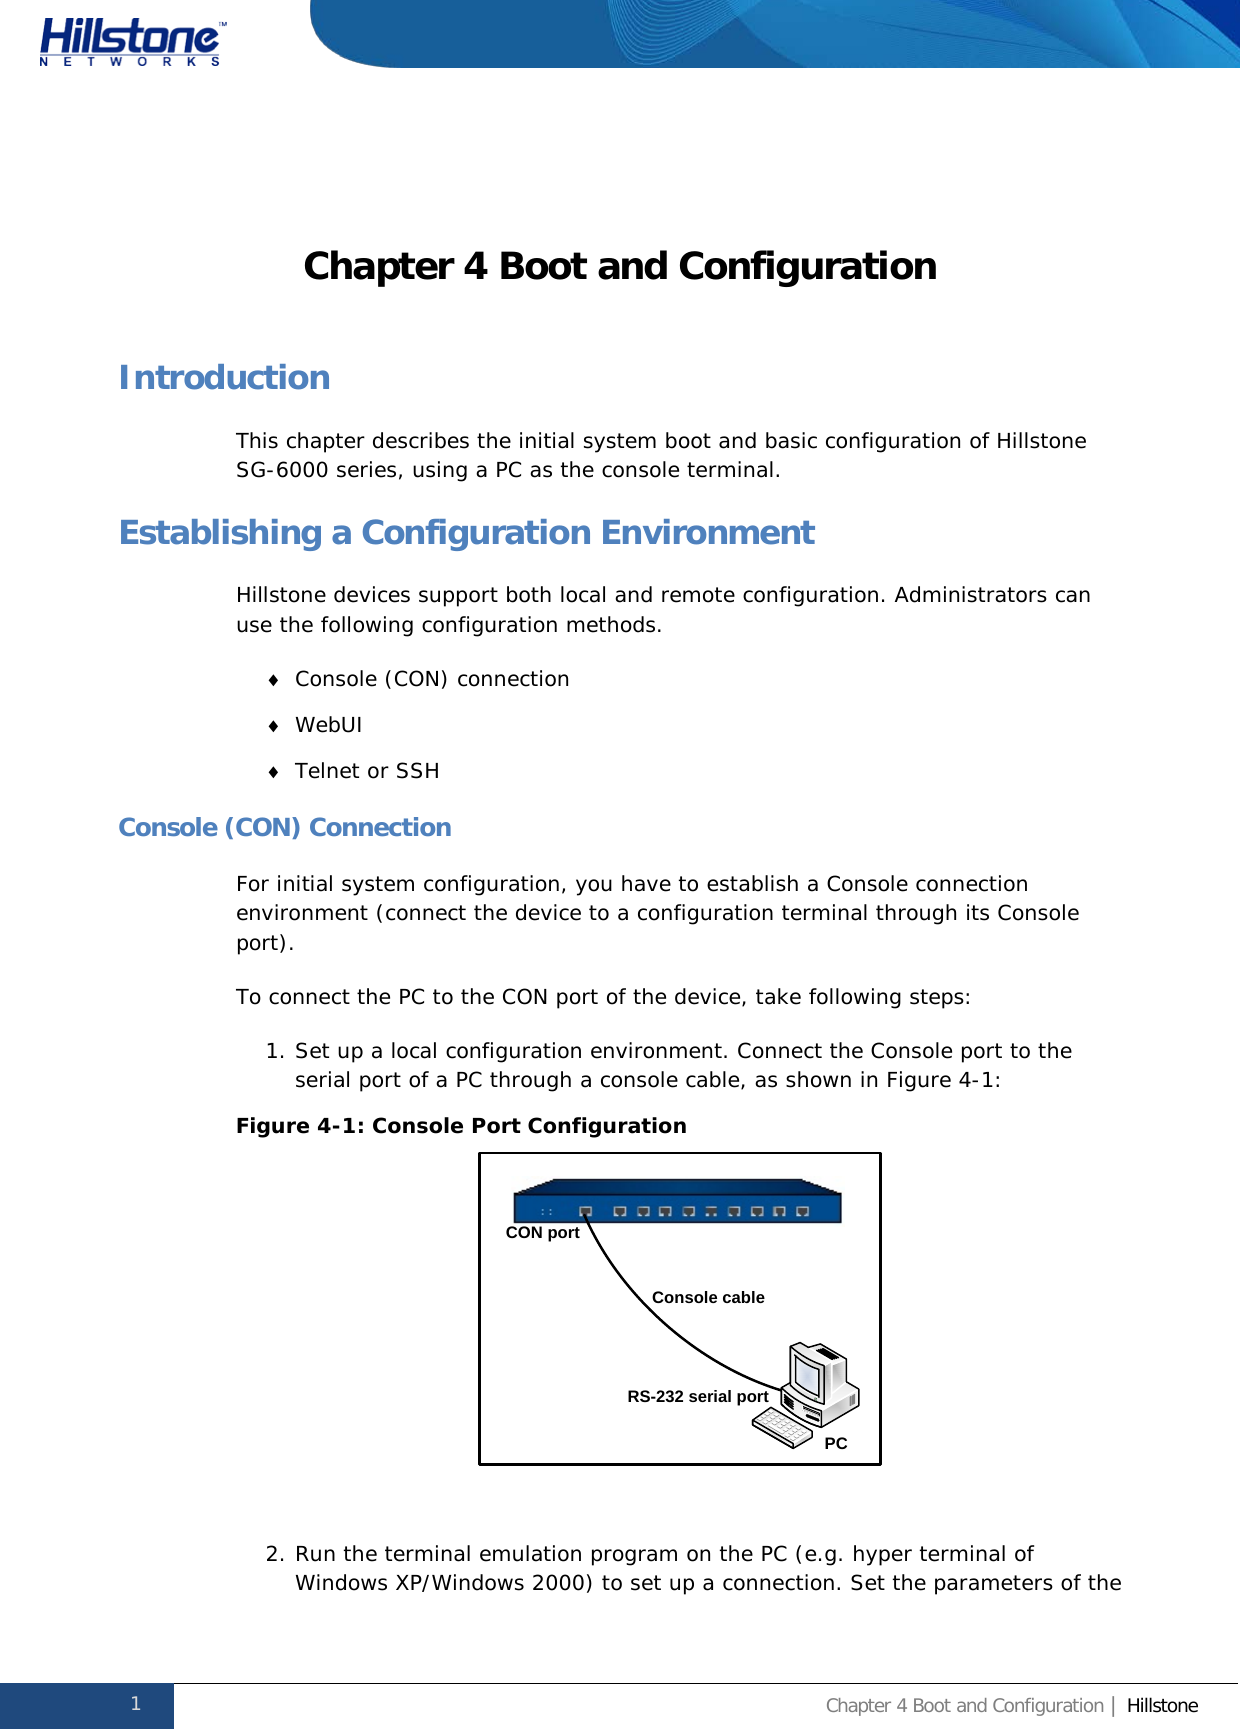              Hillstone  Hardware Reference Guide Chapter 4 Boot and Configuration Introduction This chapter describes the initial system boot and basic configuration of Hillstone SG-6000 series, using a PC as the console terminal. Establishing a Configuration Environment Hillstone devices support both local and remote configuration. Administrators can use the following configuration methods. ♦ Console (CON) connection ♦ WebUI ♦ Telnet or SSH Console (CON) Connection For initial system configuration, you have to establish a Console connection environment (connect the device to a configuration terminal through its Console port).  To connect the PC to the CON port of the device, take following steps: 1. Set up a local configuration environment. Connect the Console port to the serial port of a PC through a console cable, as shown in Figure 4-1: Figure 4-1: Console Port Configuration   2. Run the terminal emulation program on the PC (e.g. hyper terminal of Windows XP/Windows 2000) to set up a connection. Set the parameters of the CON portConsole cableRS-232 serial portPC1 Chapter 4 Boot and Configuration | Hillstone  